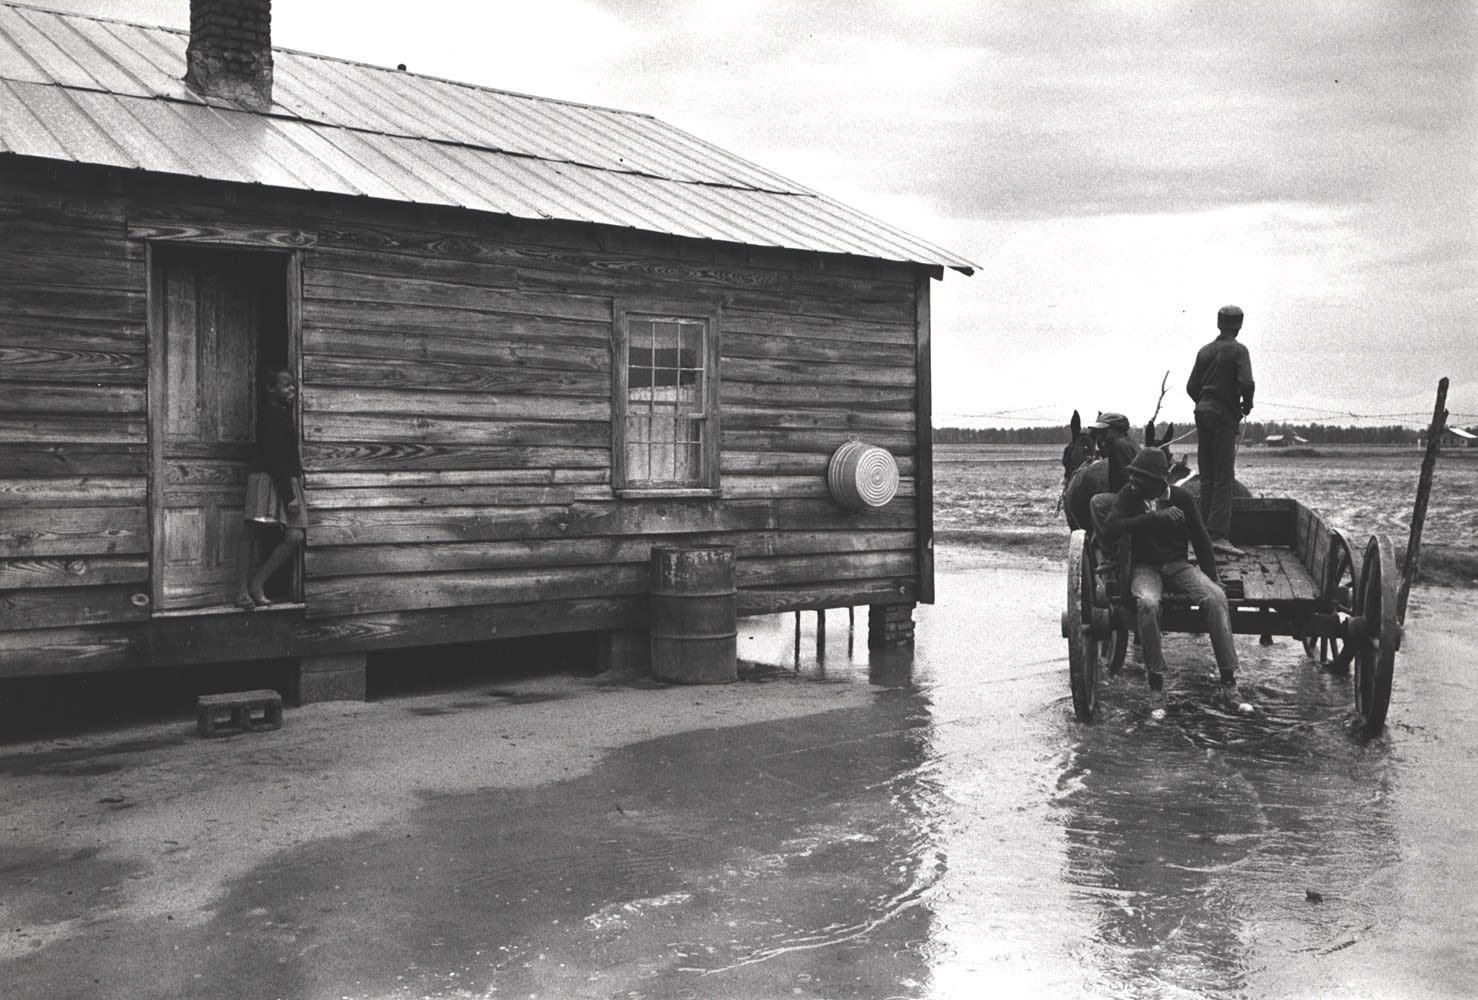 Constantine Manos, Untitled, Sharecroppers, South Carolina (puddle, house, horse drawn wagon), 1965